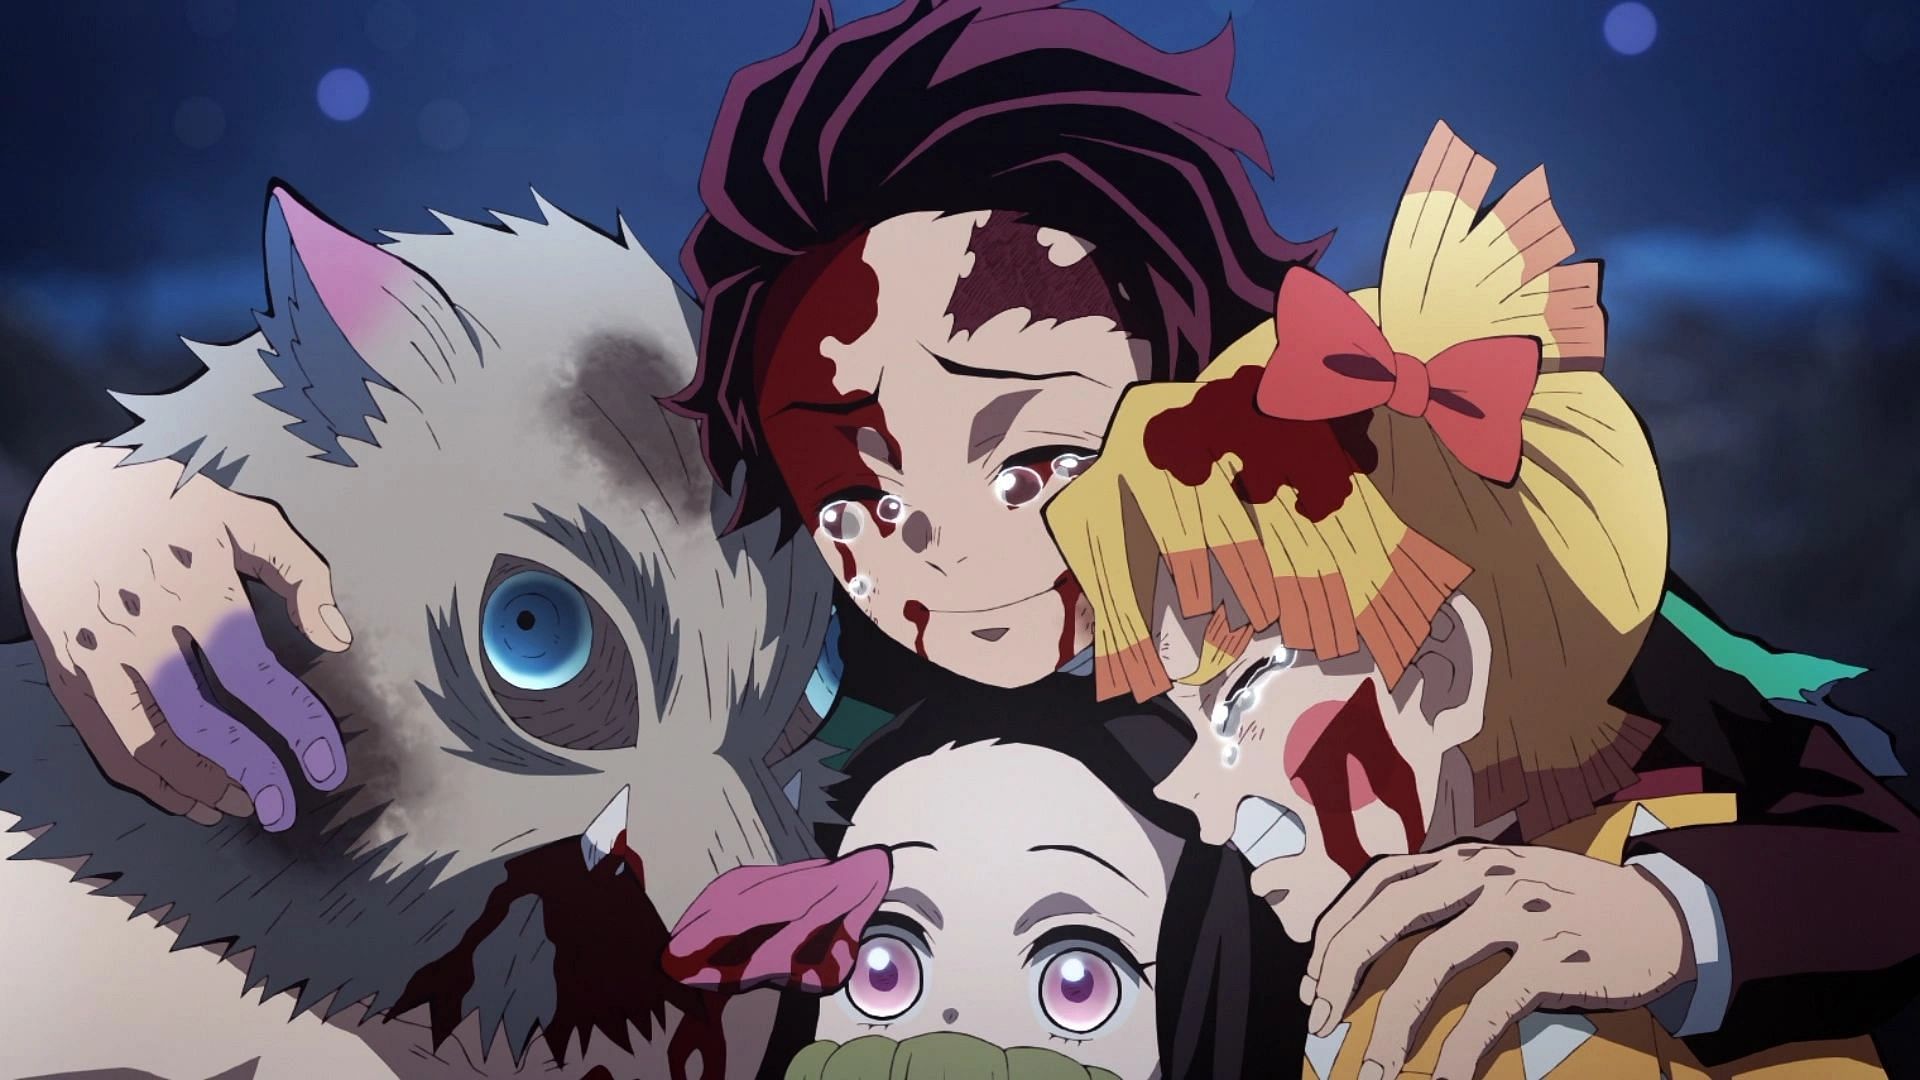 Tanjiro and his closest comrades as seen in the anime series (Image via Ufotable)